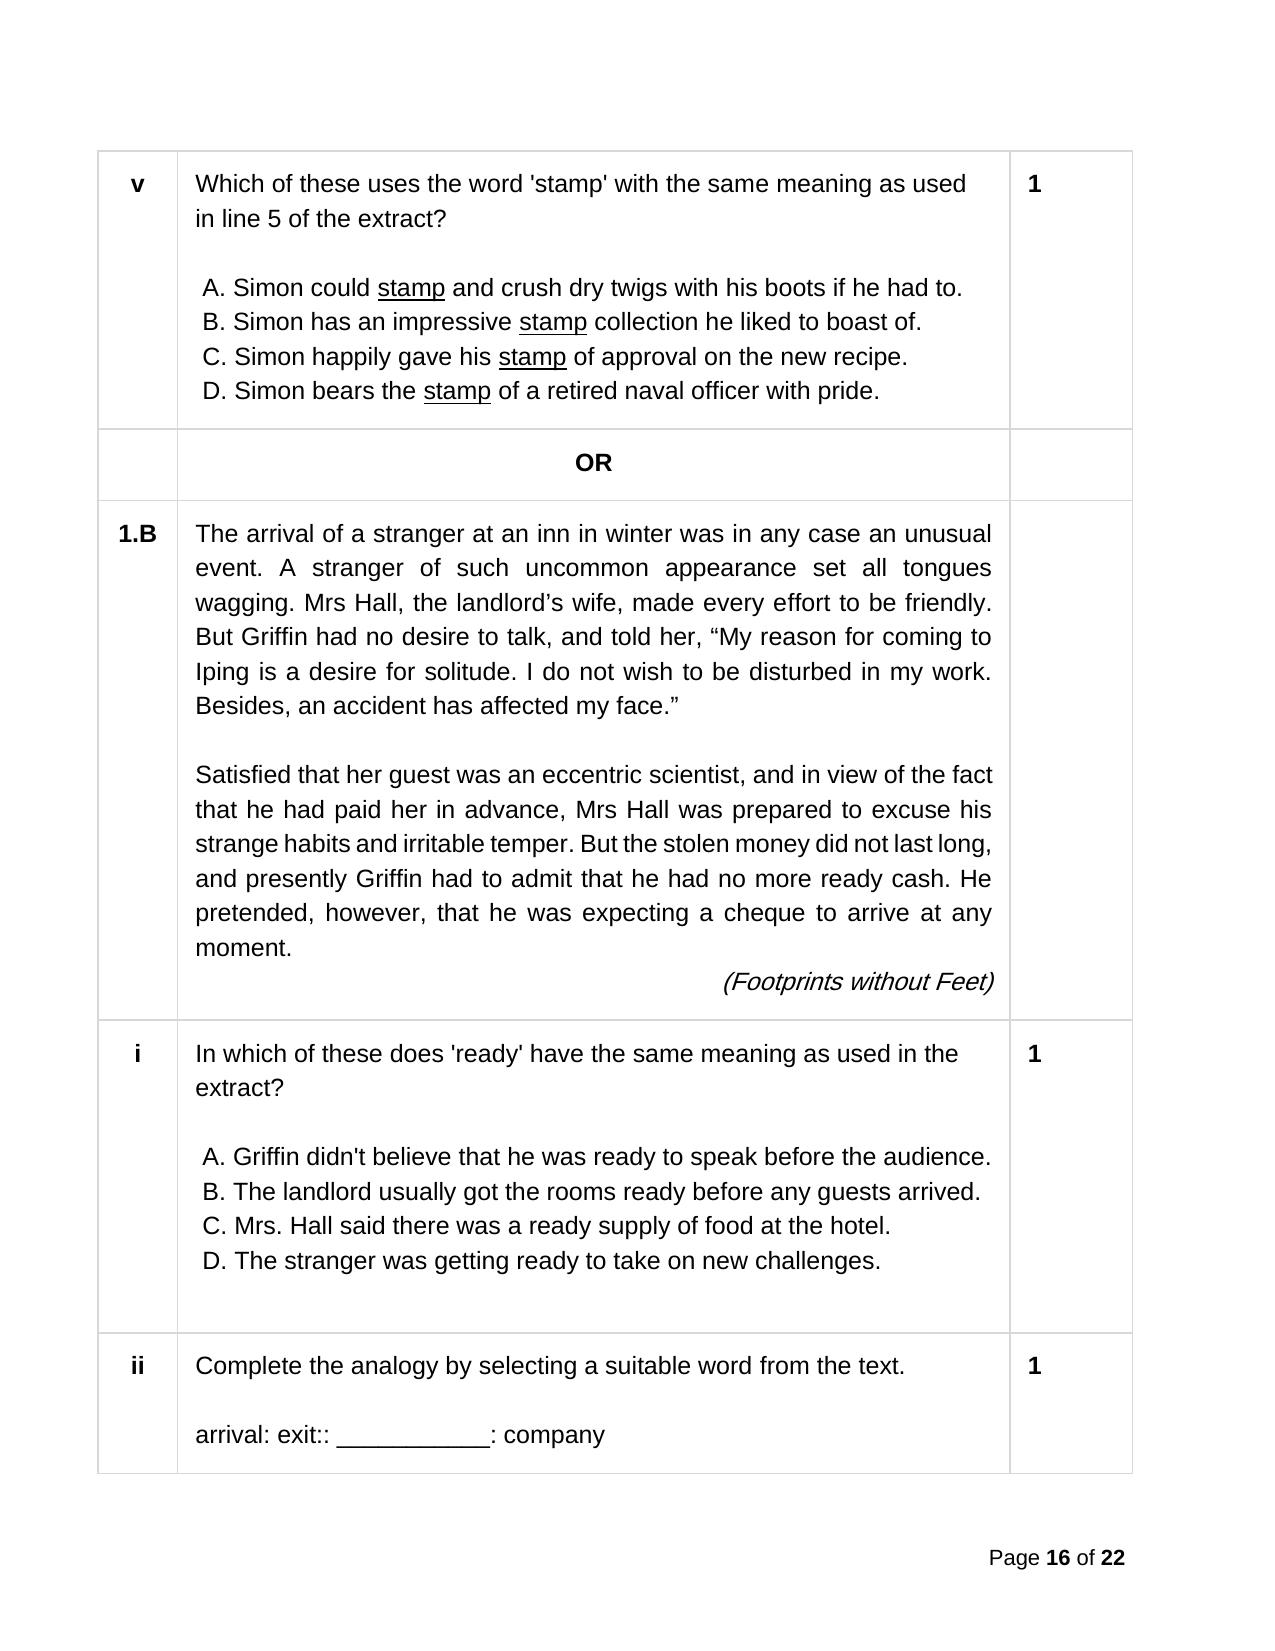 CBSE Class 10 English Practice Questions 2022-23 - Page 16